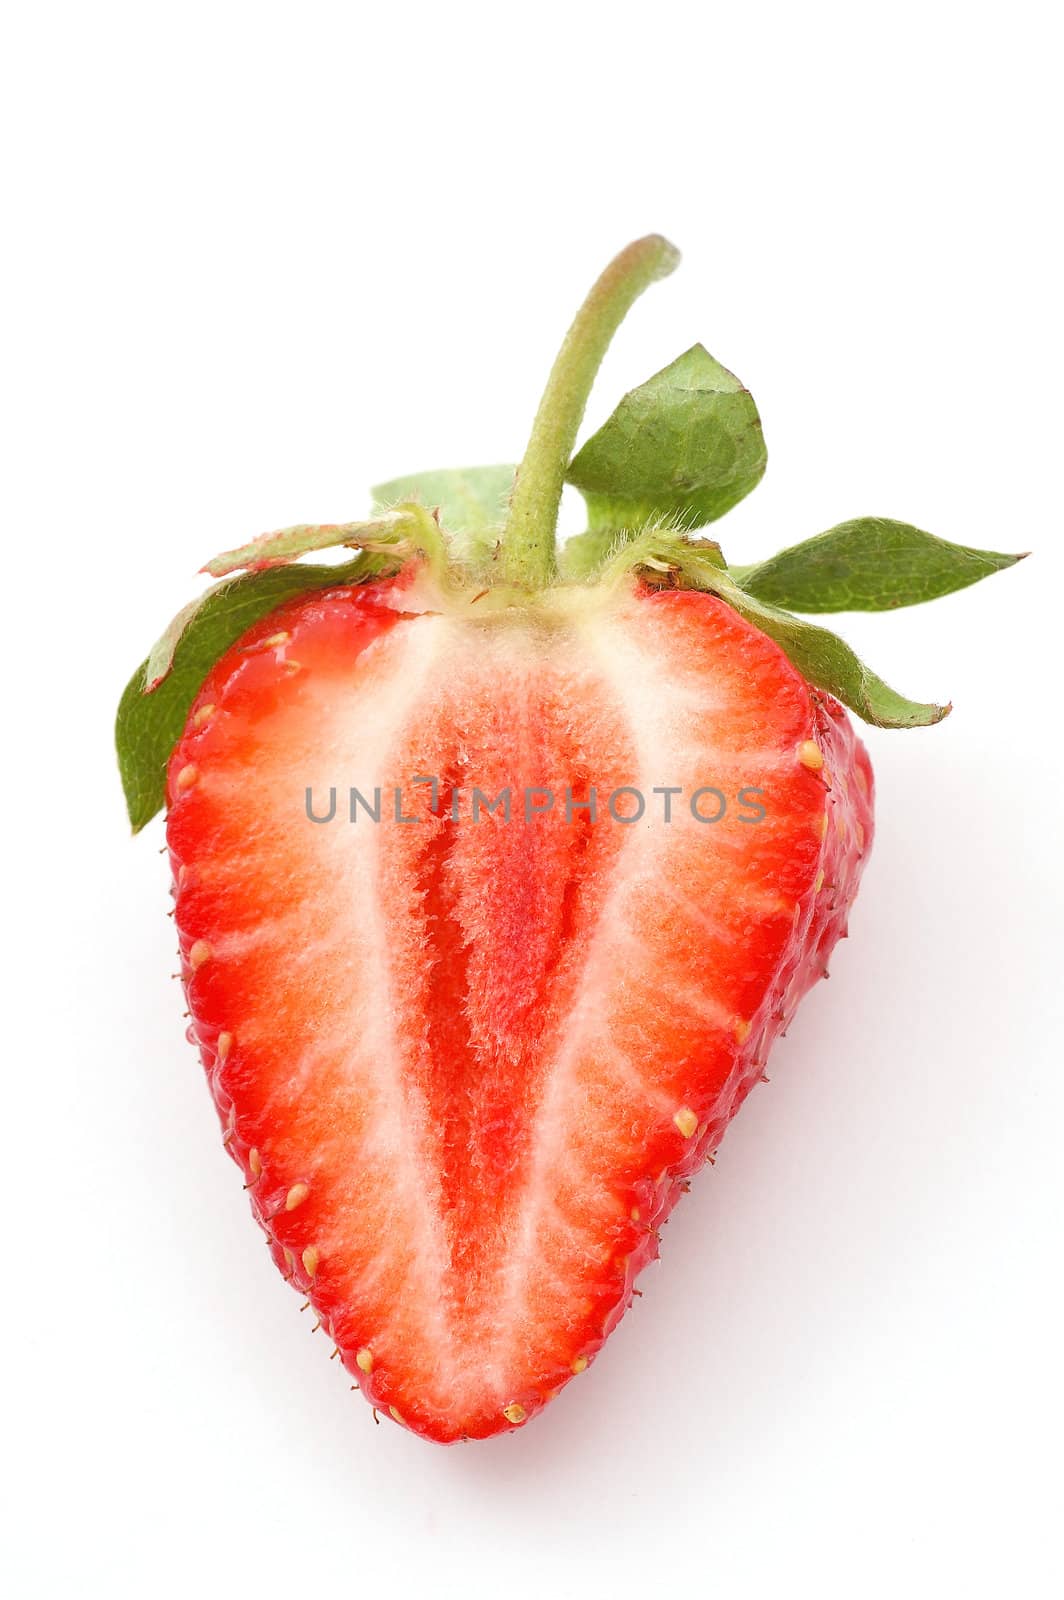 Sliced strawberrie on the table